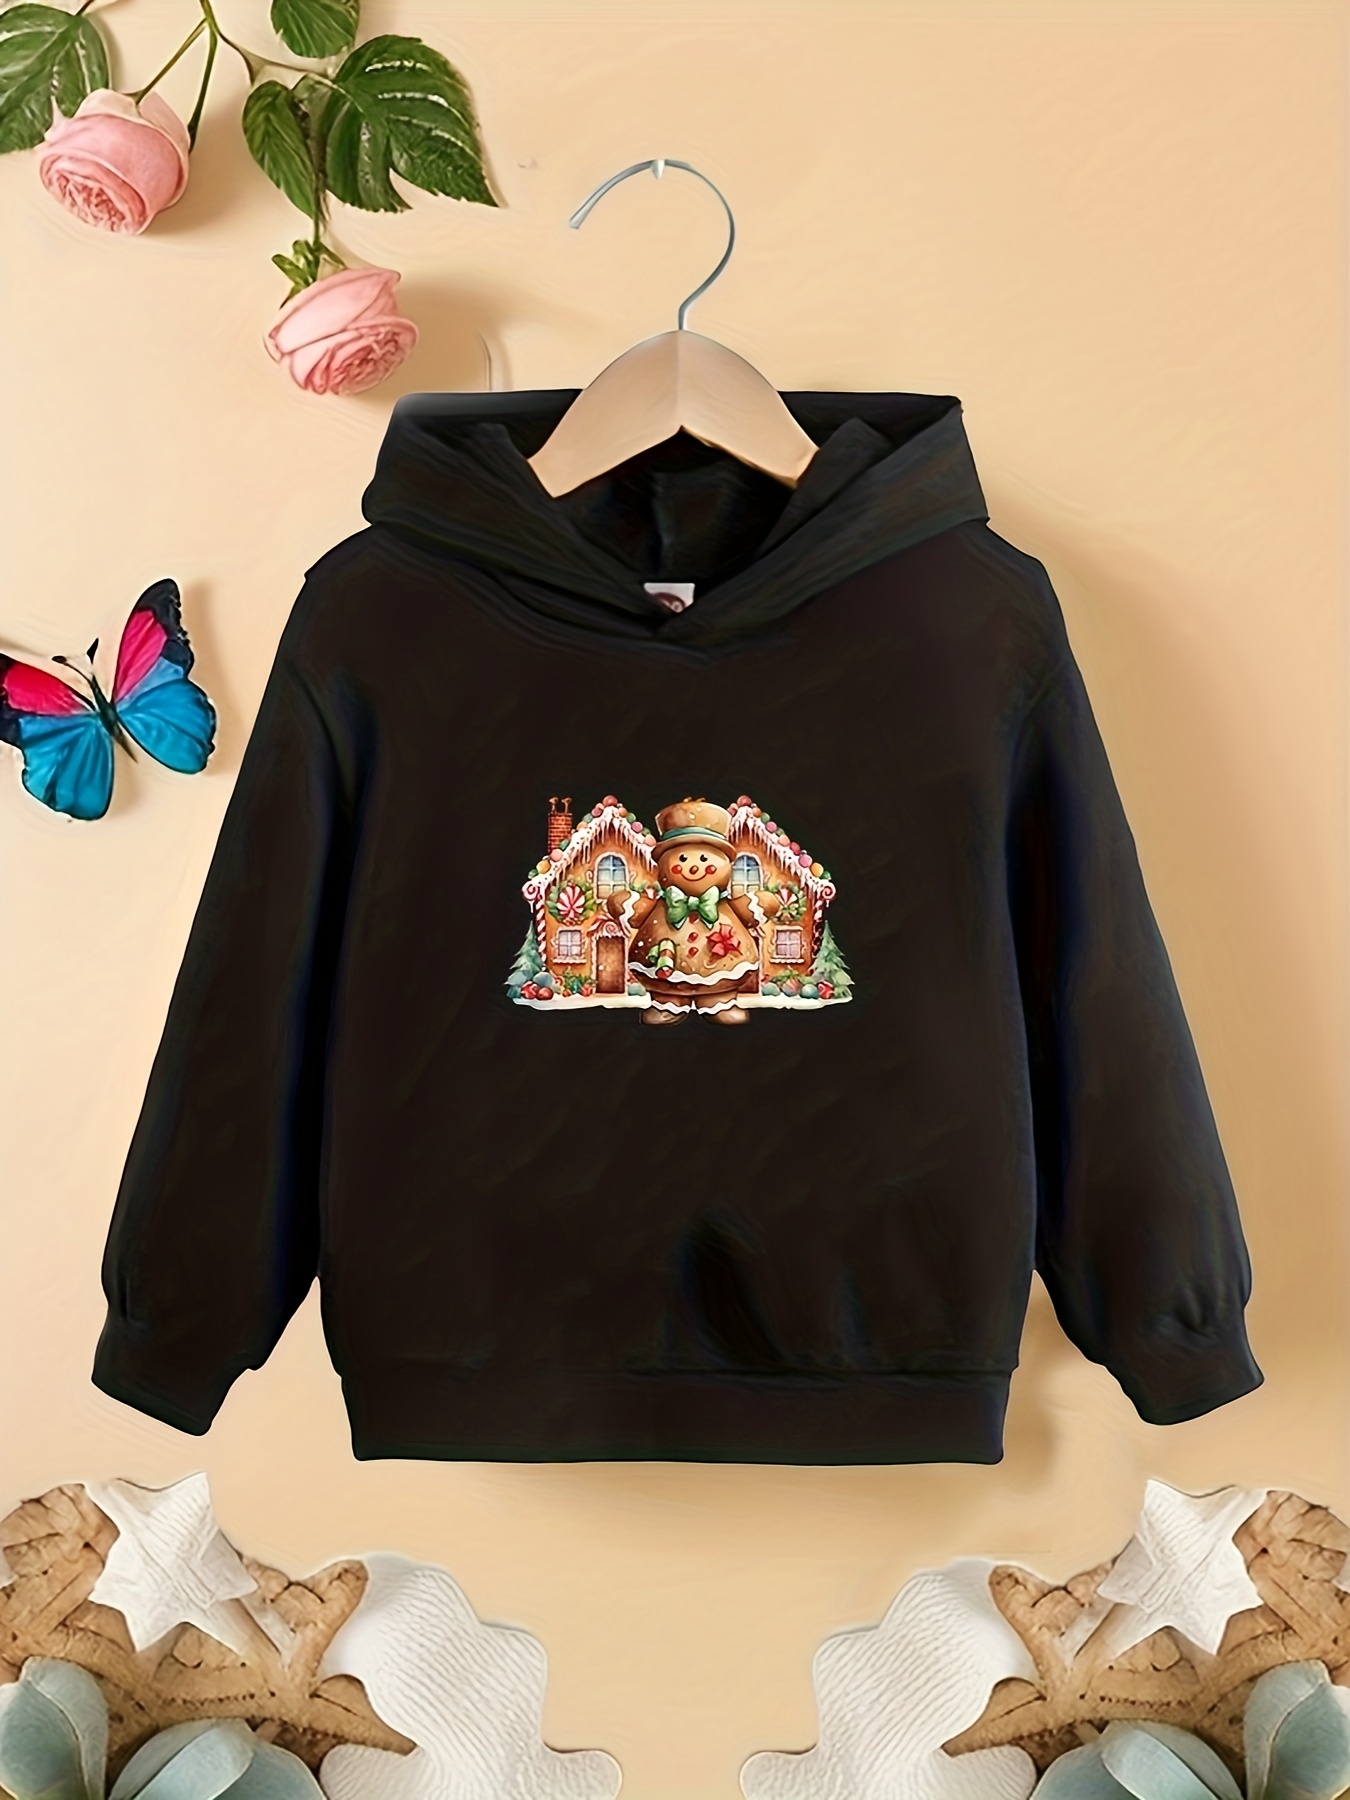  Women's Hoodies Cute Soft Casual Hooded Pullovers